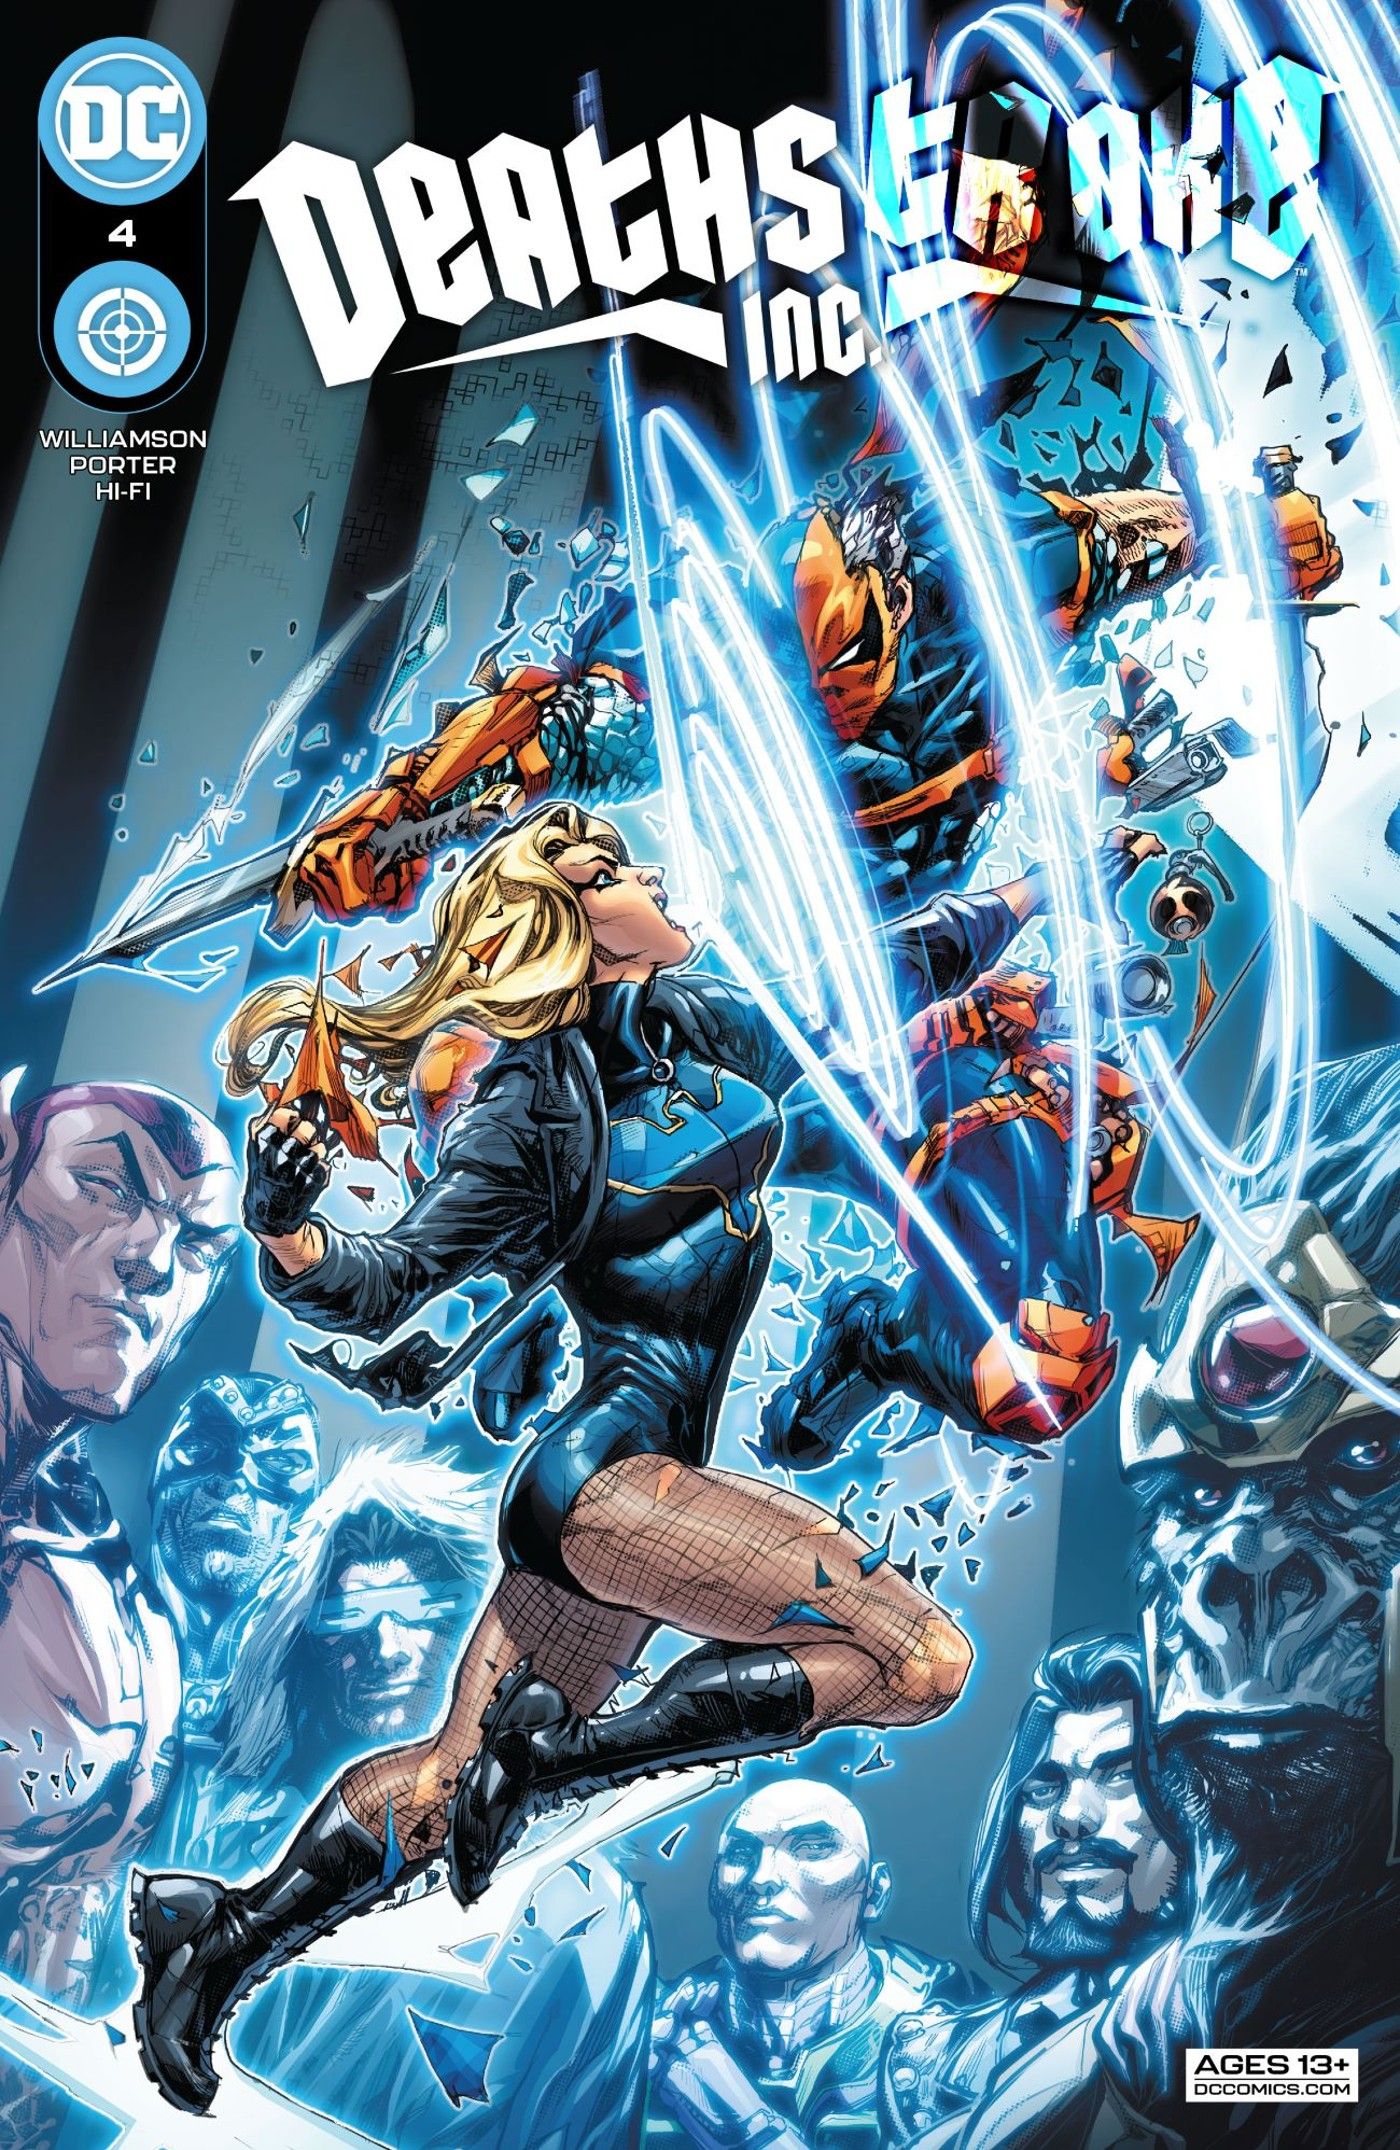 Black Canary Takes on Deathstroke in DC Comics